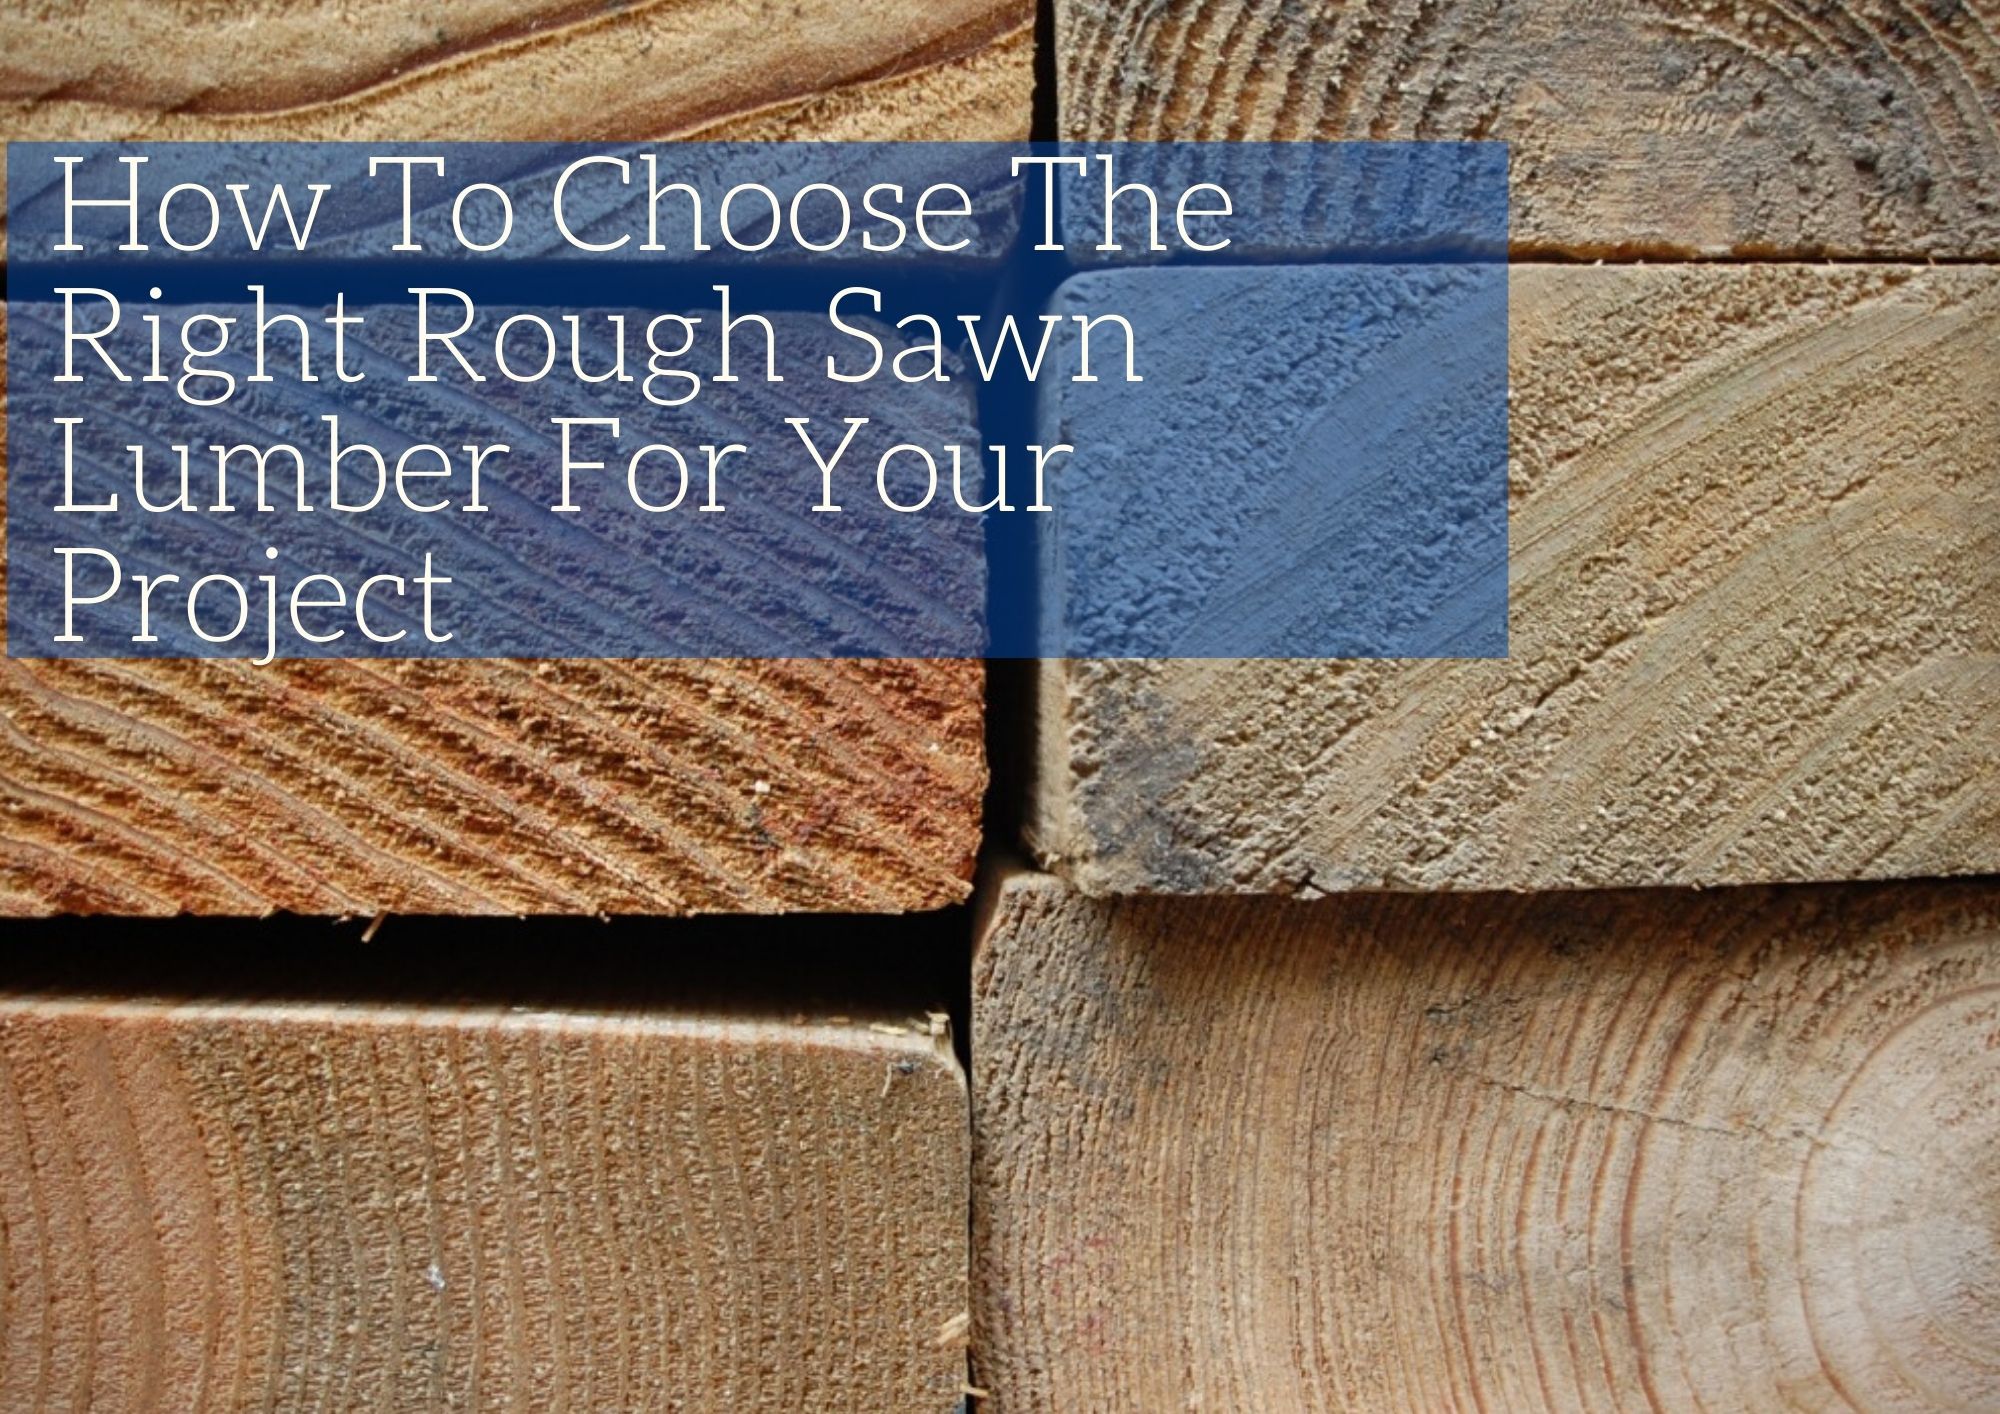 How To Choose The Right Rough Sawn Lumber For Your Project